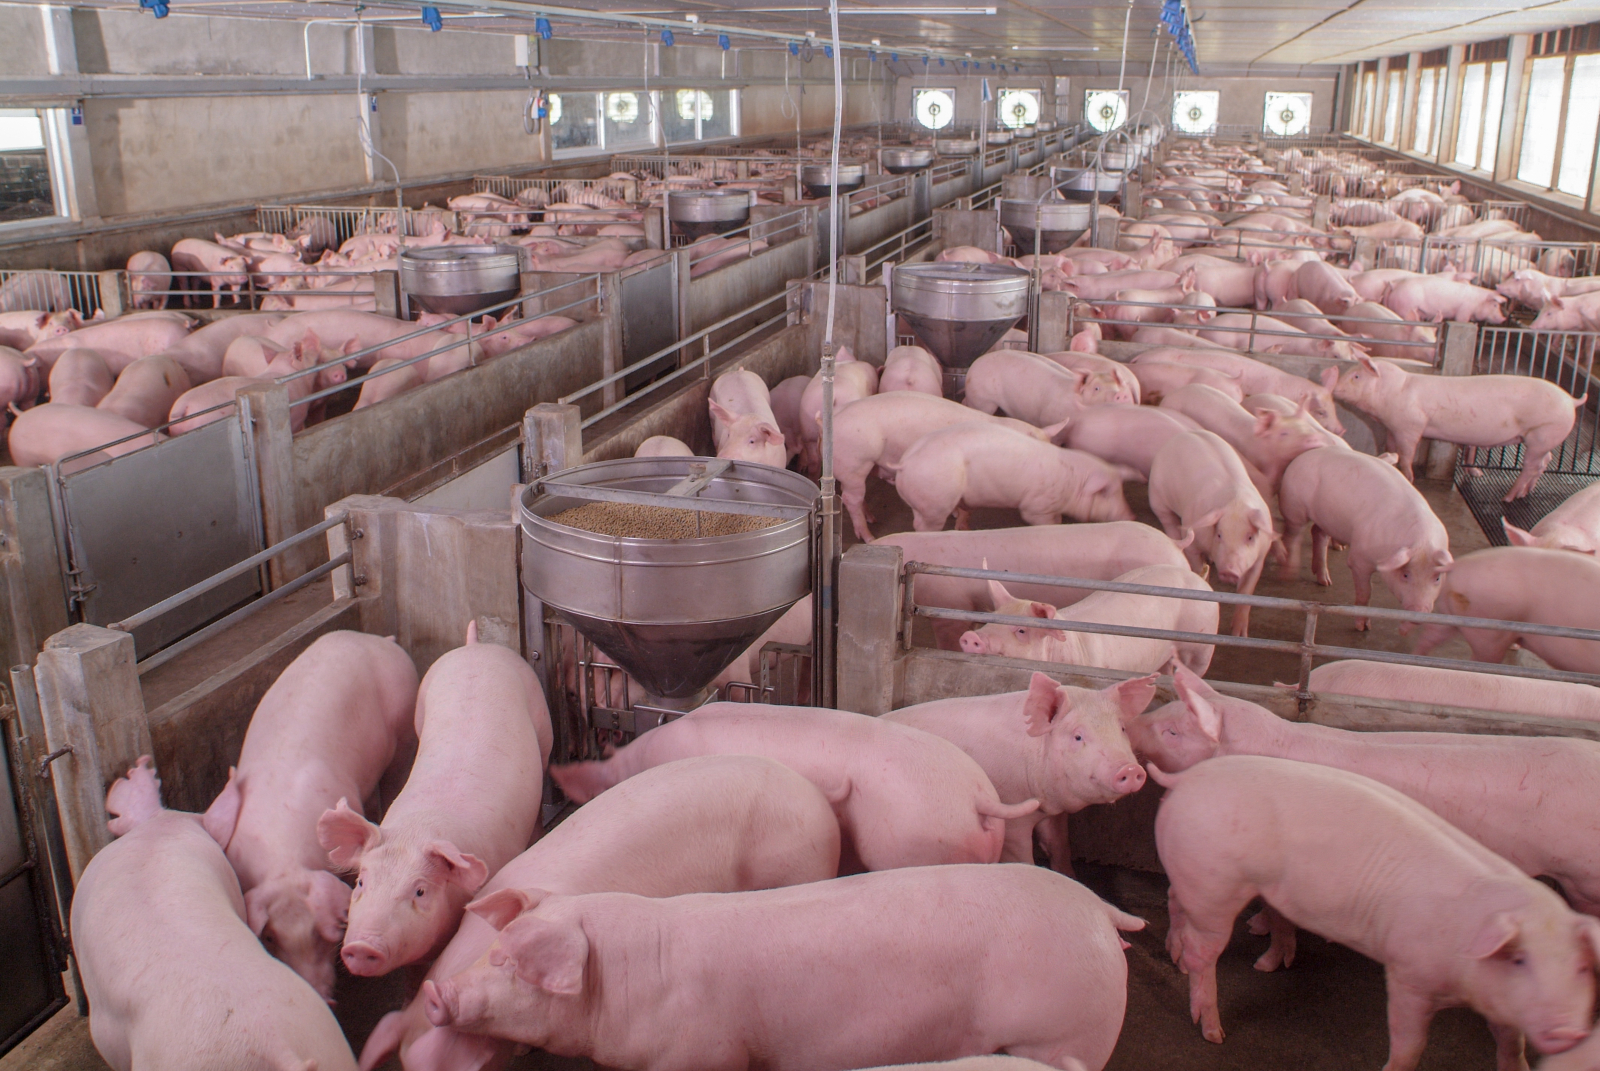 A tiny Wisconsin town tried to stop pollution from factory farms. Then it got sued.